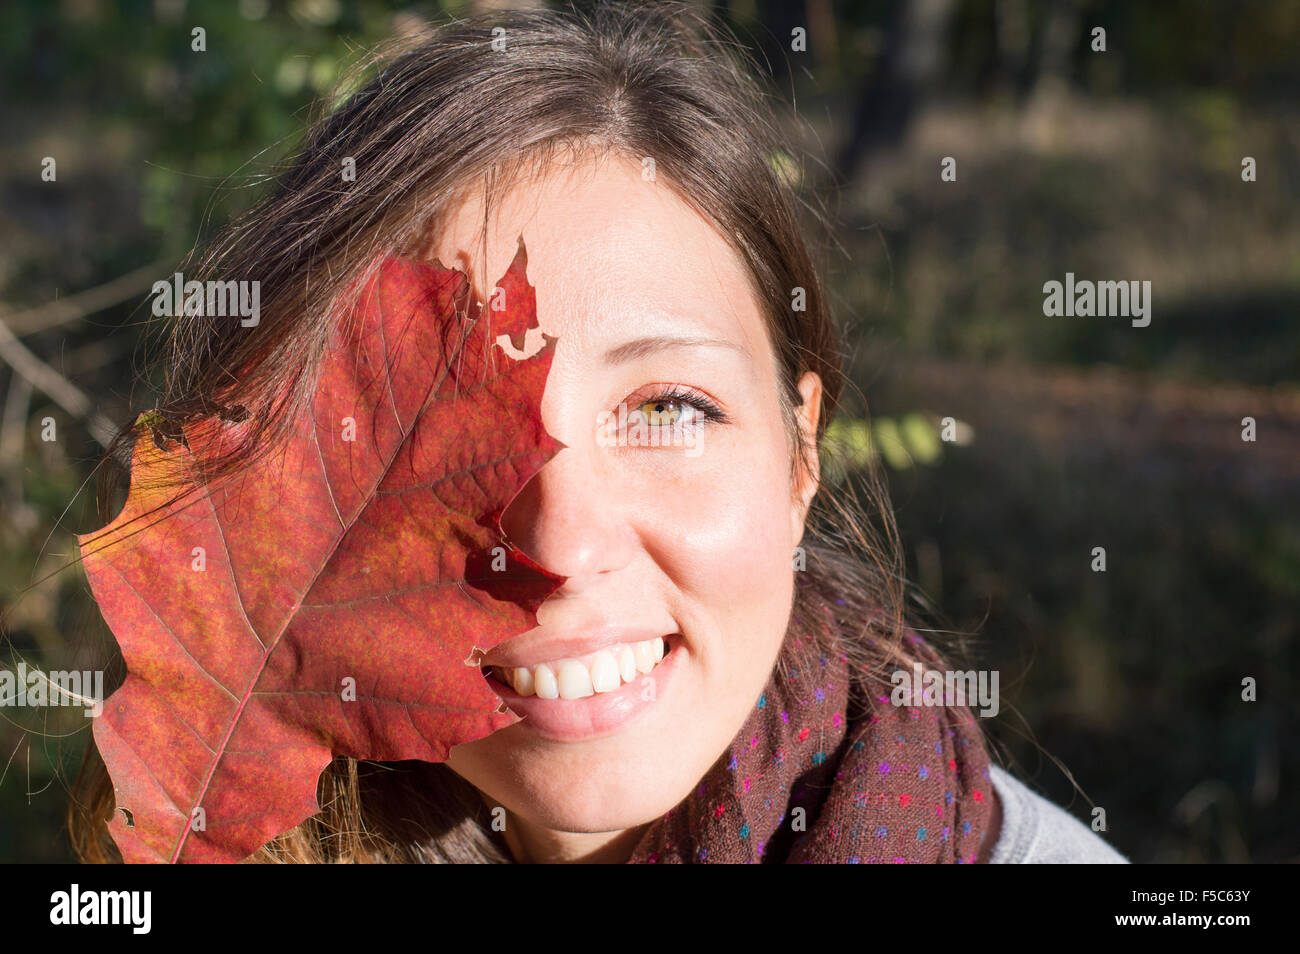 Autumn beauty portrait outdoors. Girl with gorgeous green eyes holding red autumn leaf over her face in the park Stock Photo